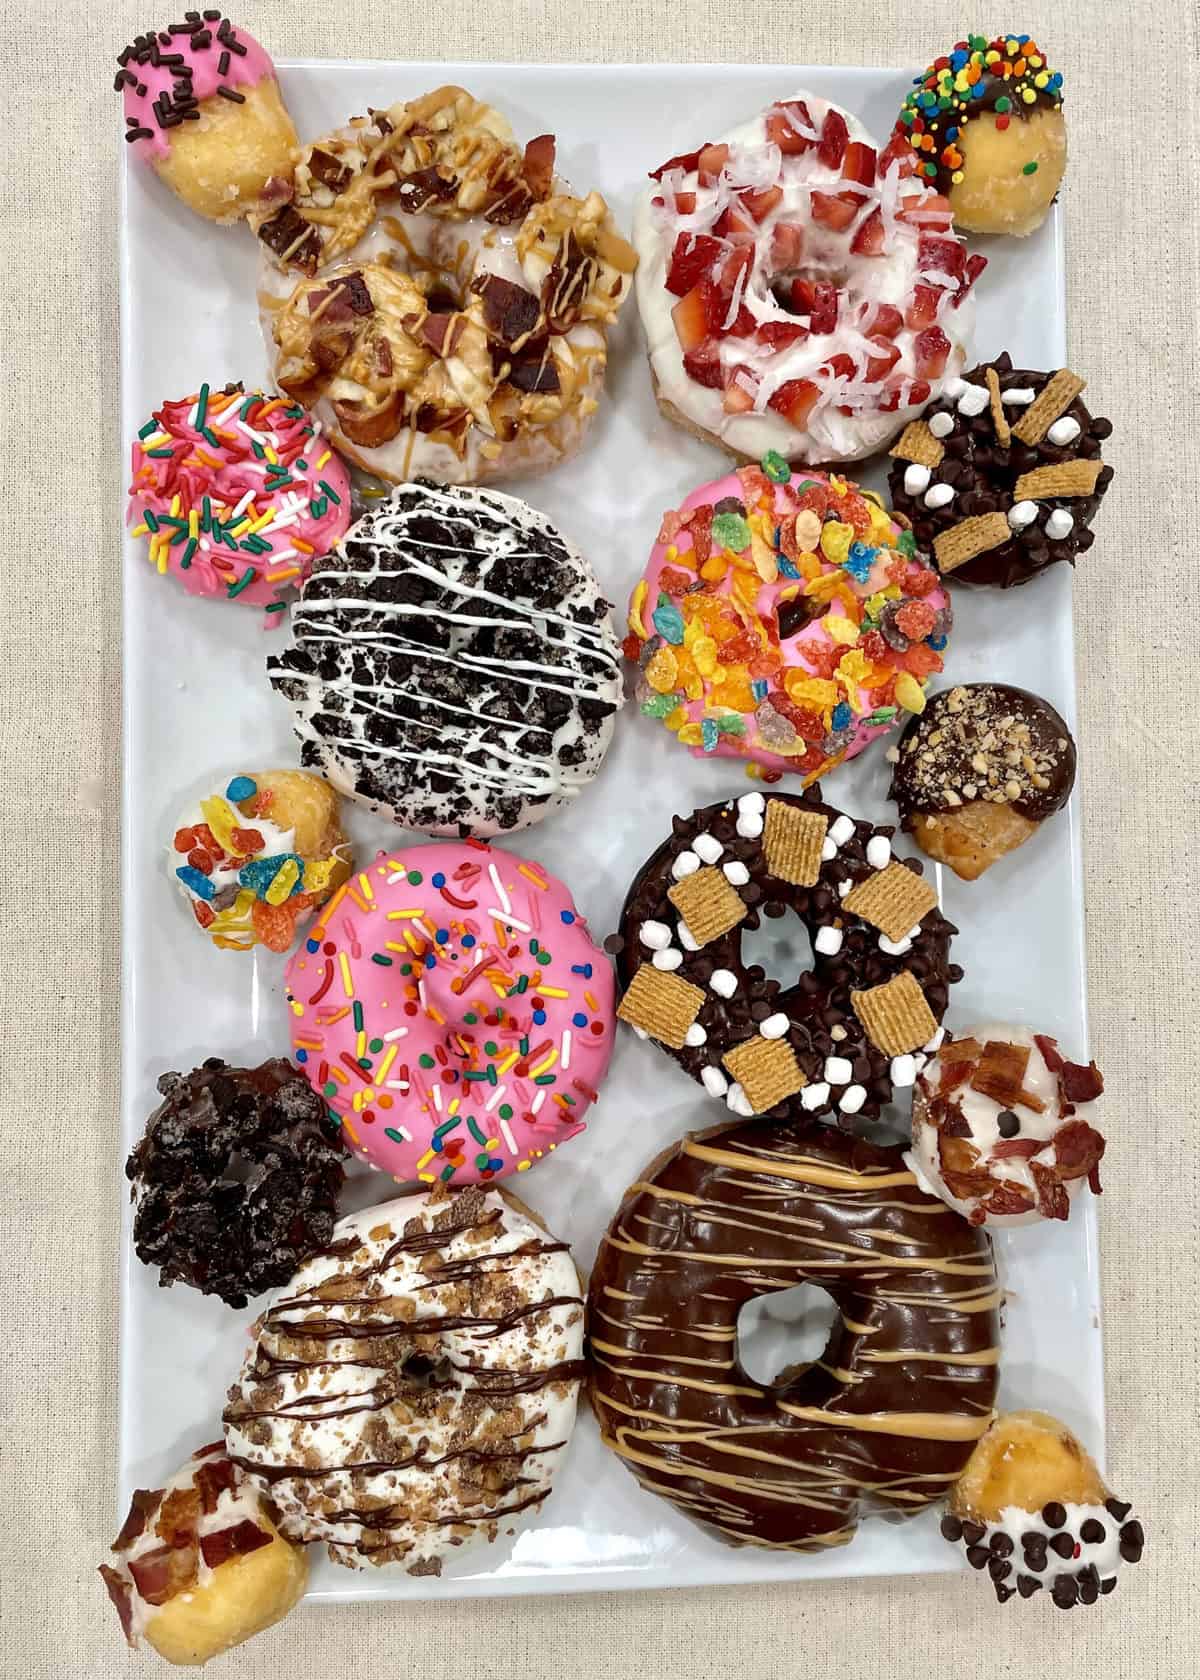 Decorate-Your-Own Donut Spread